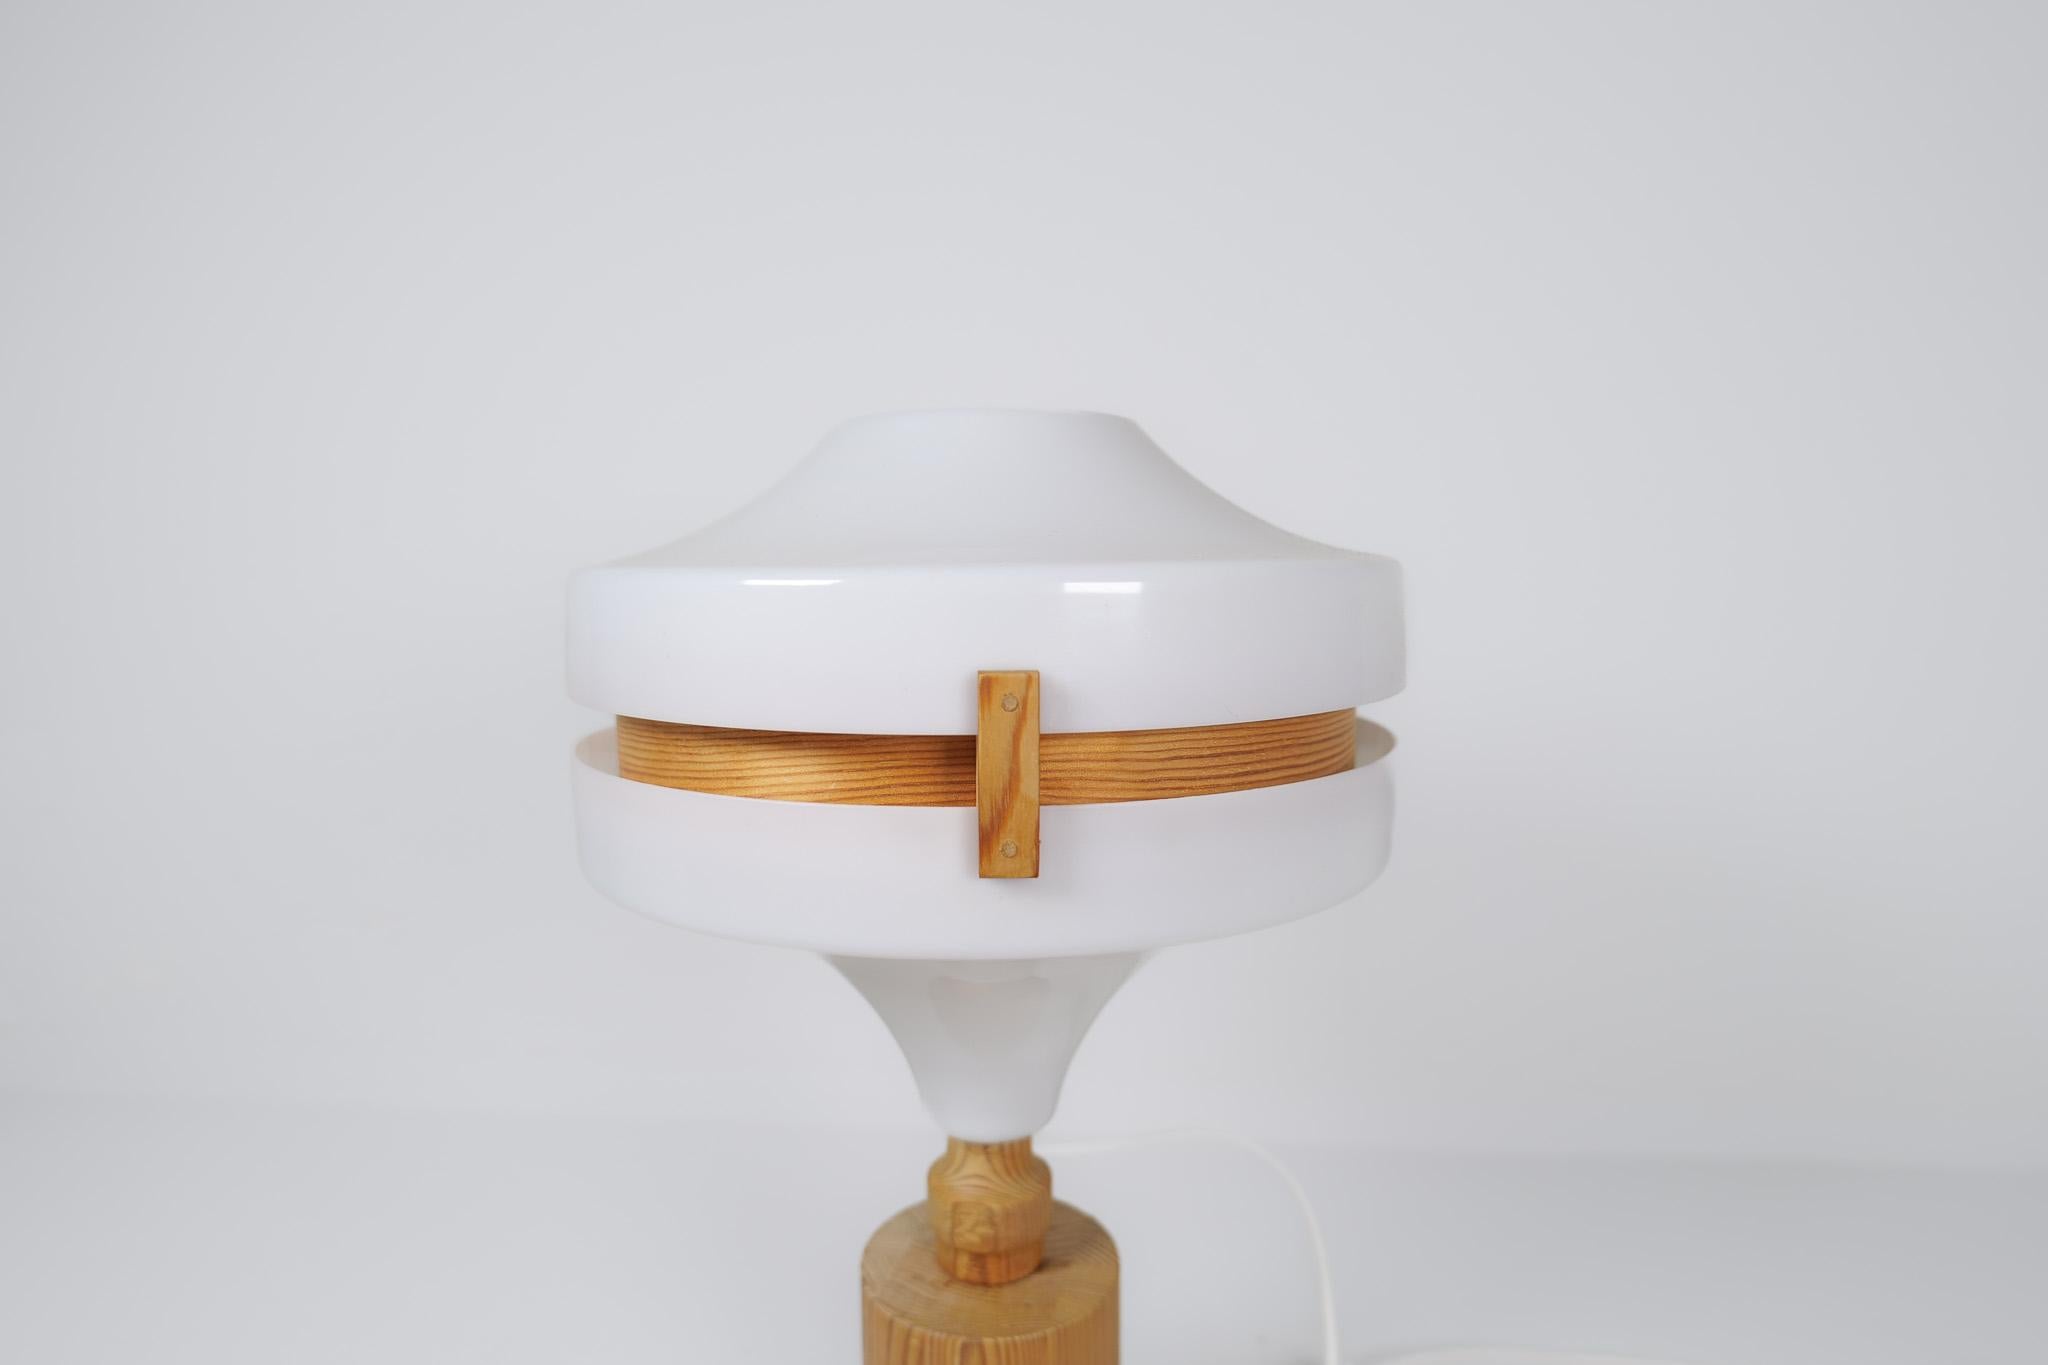 Mid-Century Modern Table Lamp in Pine and Acrylic, Sweden, 1970s For Sale 1